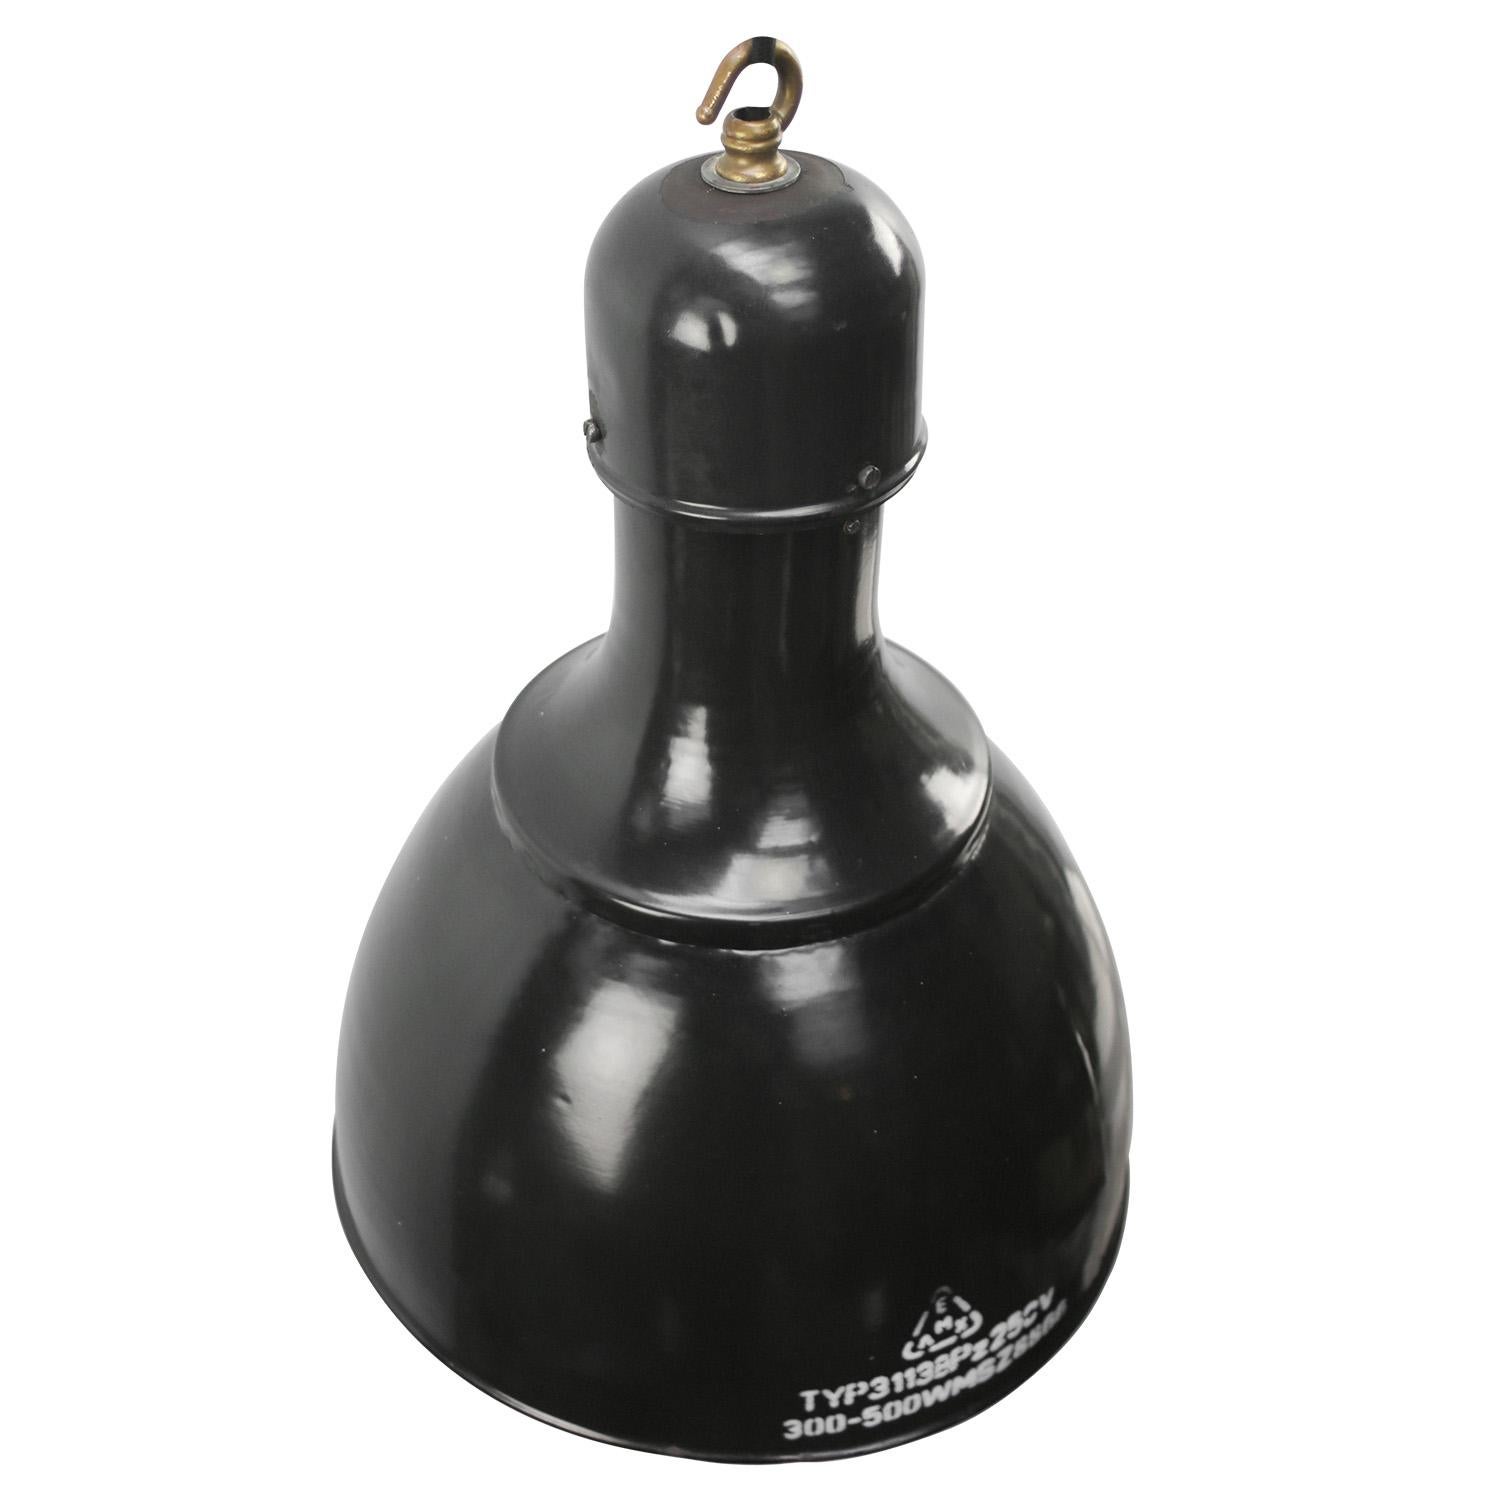 Factory light black enamel
white interior brass top

Weight: 2.8 kg / 6.2 lb

Priced per individual item. All lamps have been made suitable by international standards for incandescent light bulbs, energy-efficient and LED bulbs. E26/E27 bulb holders